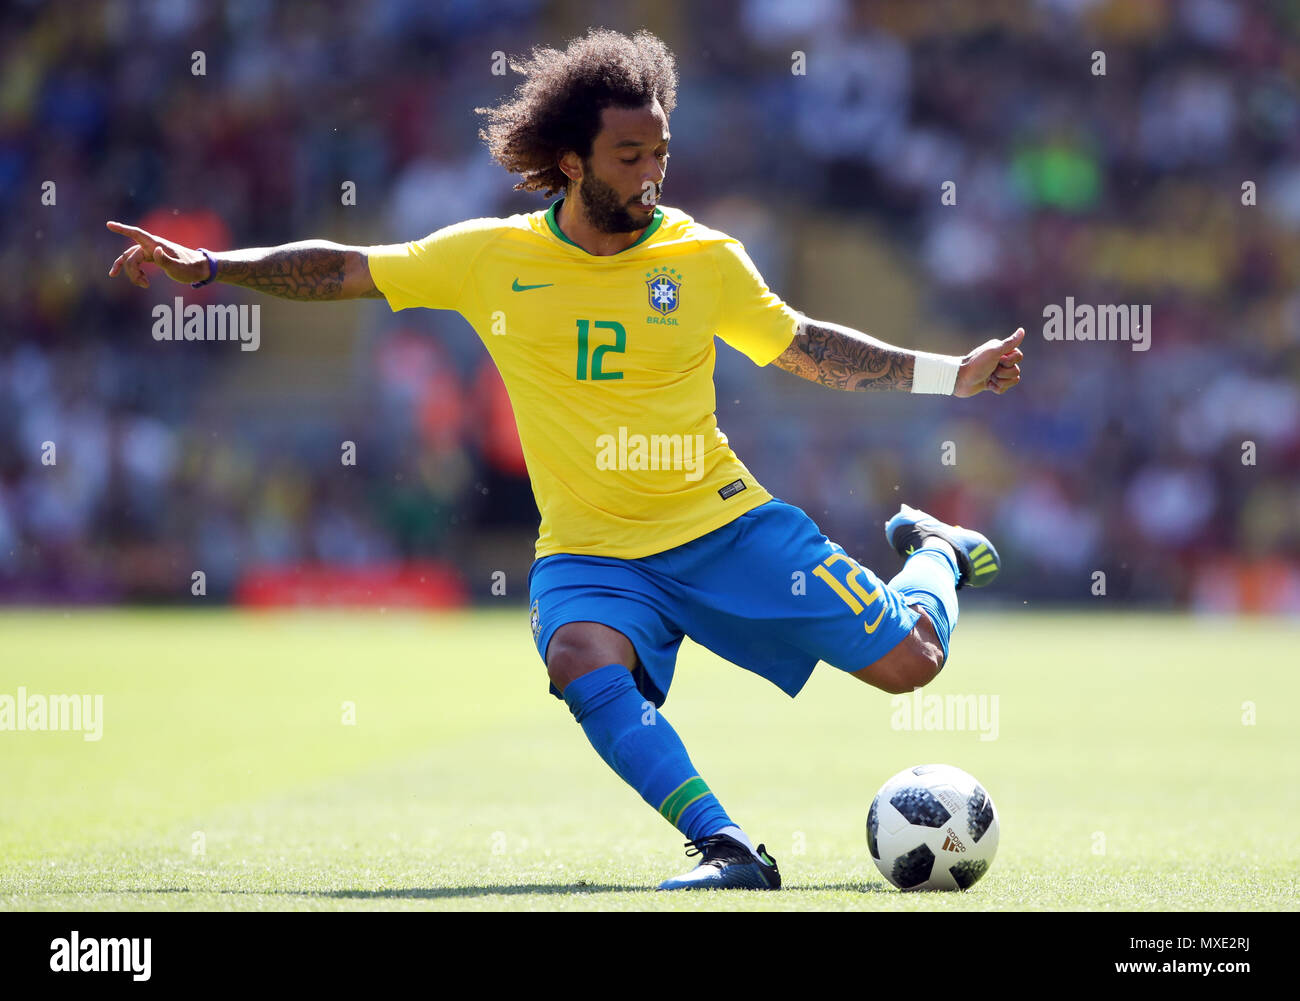 Brazil's Marcelo during the International Friendly match at Anfield, Liverpool. PRESS ASSOCIATION Photo. Picture date: Sunday June 3, 2018. See PA story SOCCER Brazil. Photo credit should read: Nick Potts/PA Wire. . Stock Photo